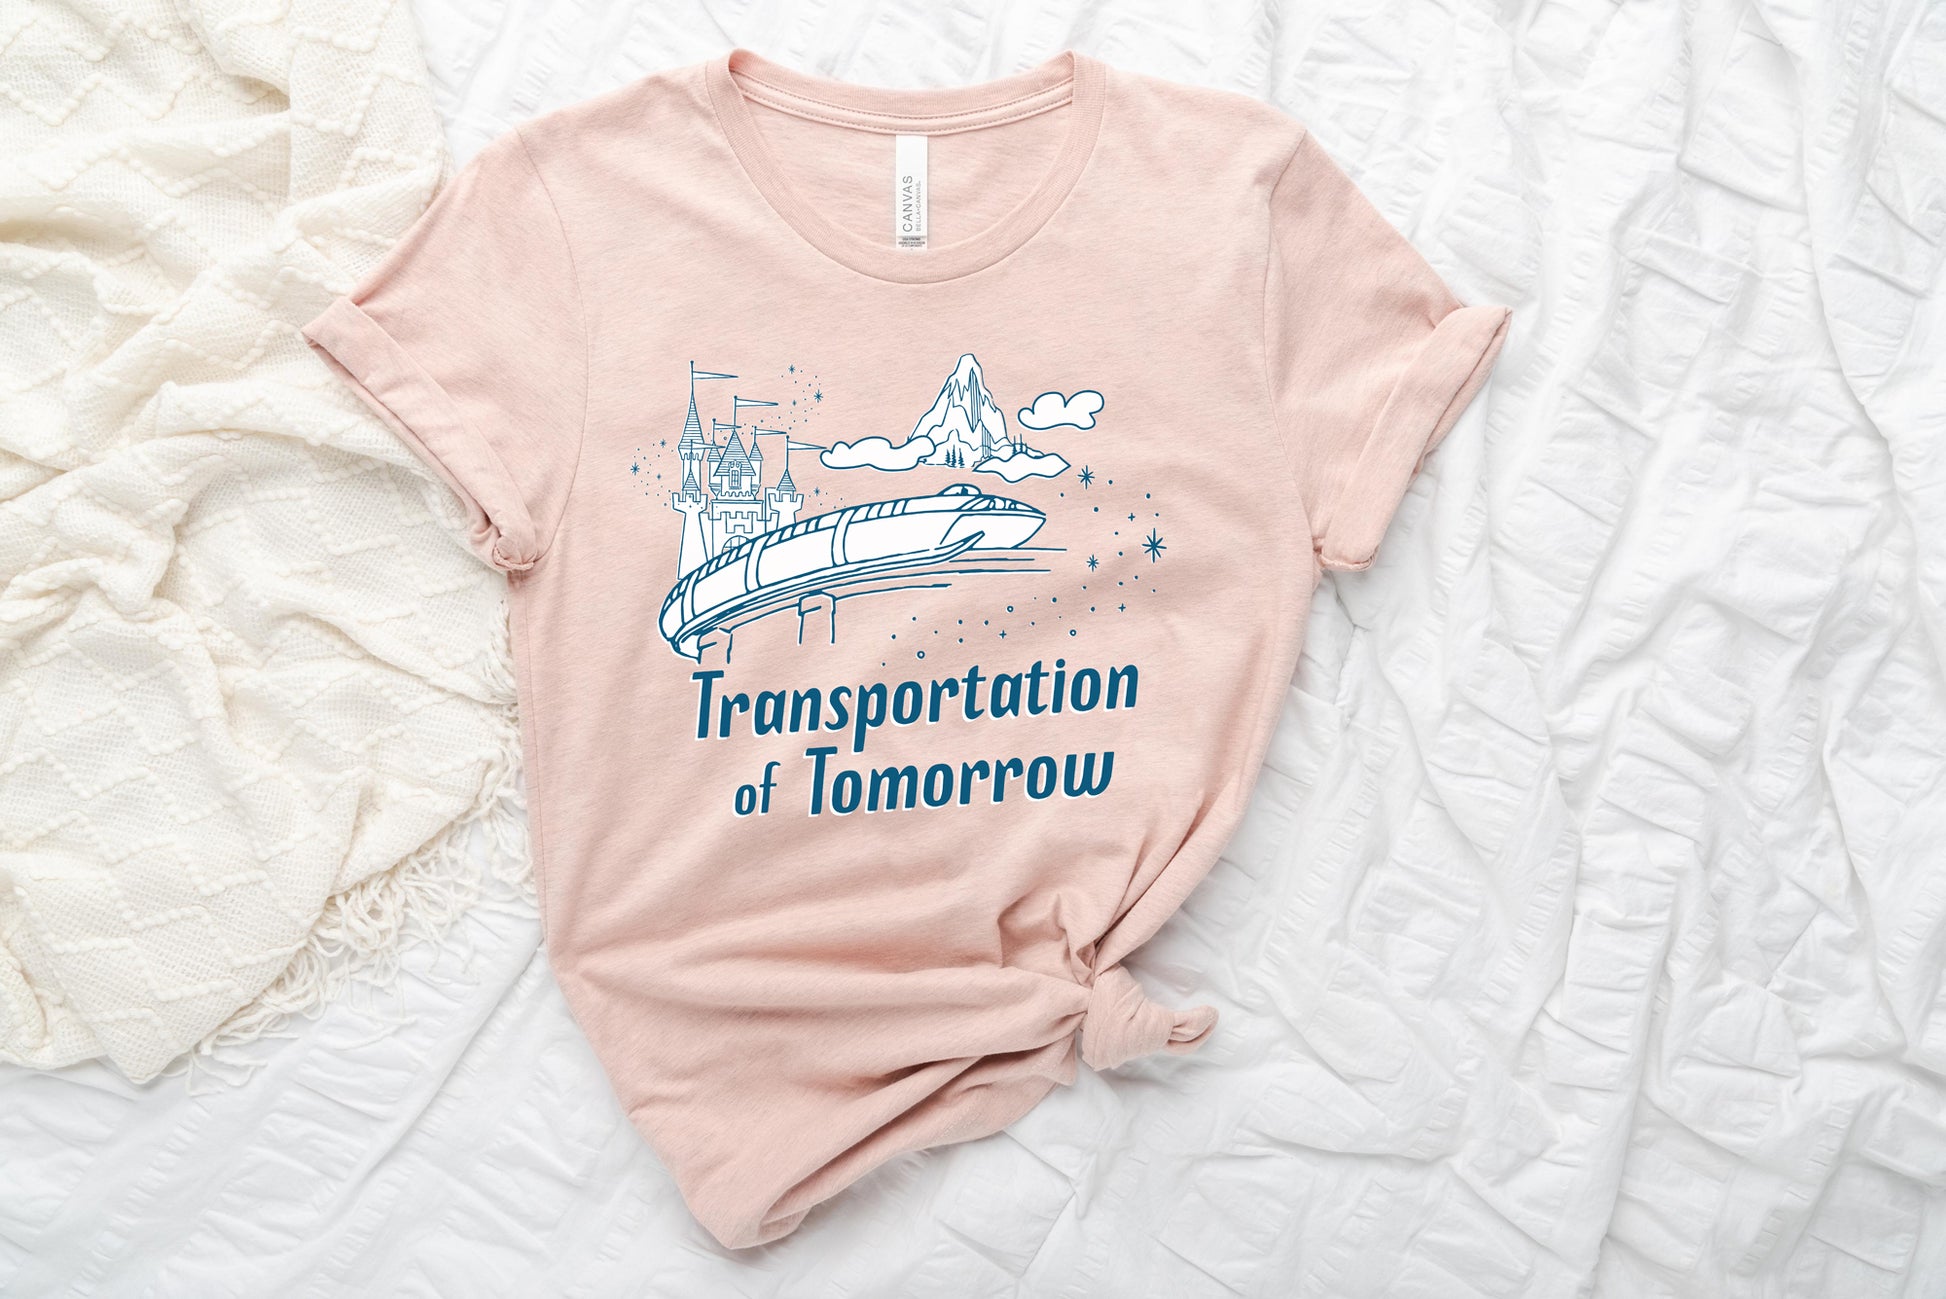 Light pink shirt printed with vintage style sketch of the Matterhorn, Castle, and Monorail with pixie dust. The shirt says Transportation of Tomorrow.